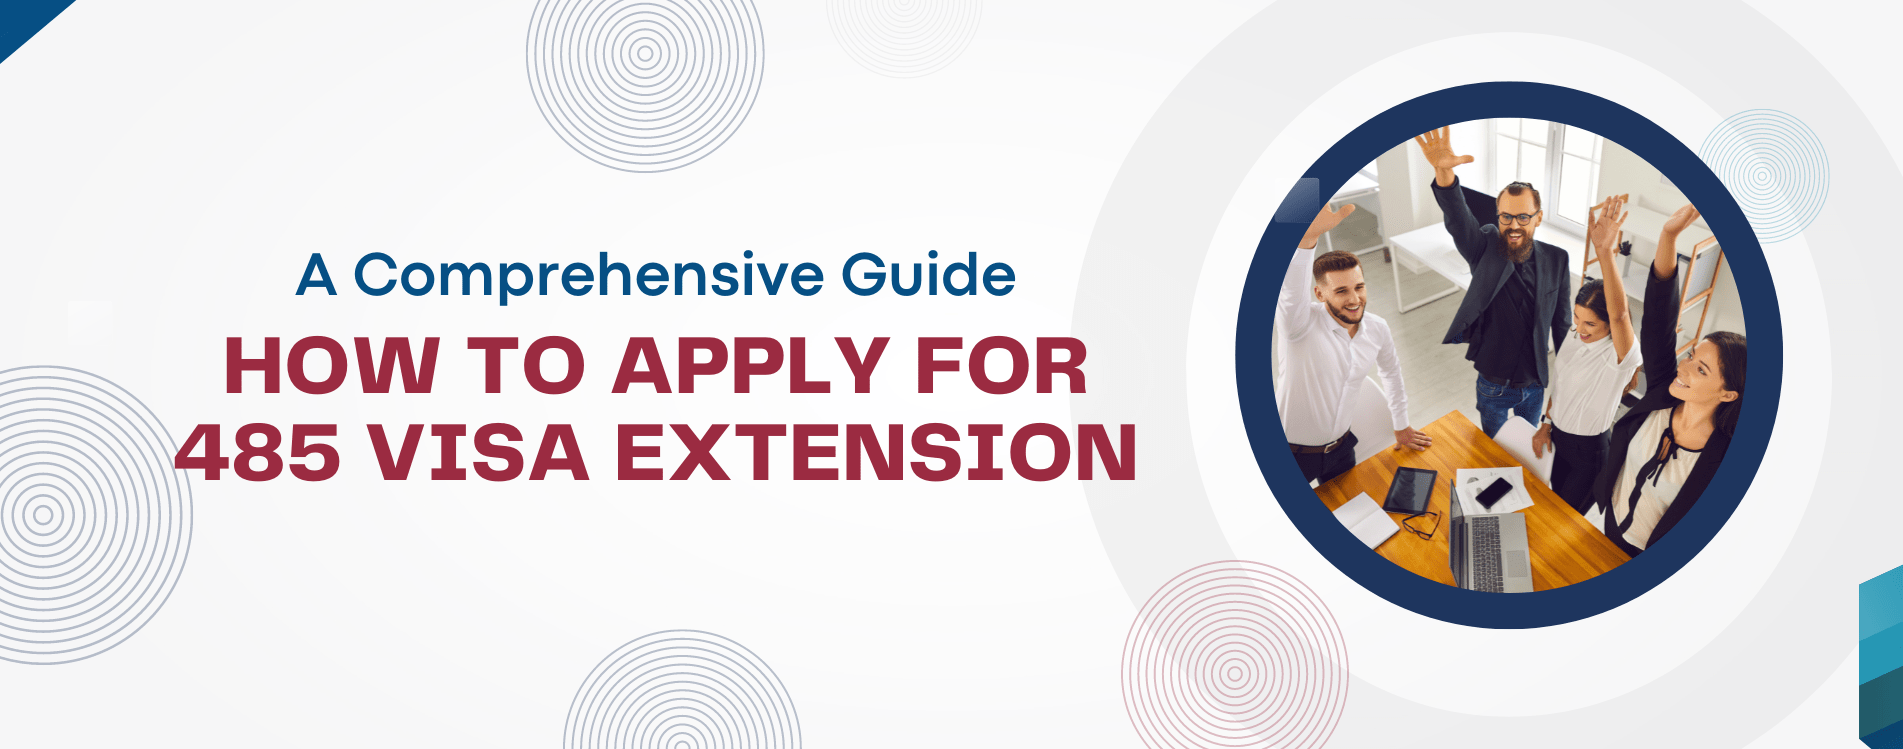 How to Apply for 485 Visa Extension